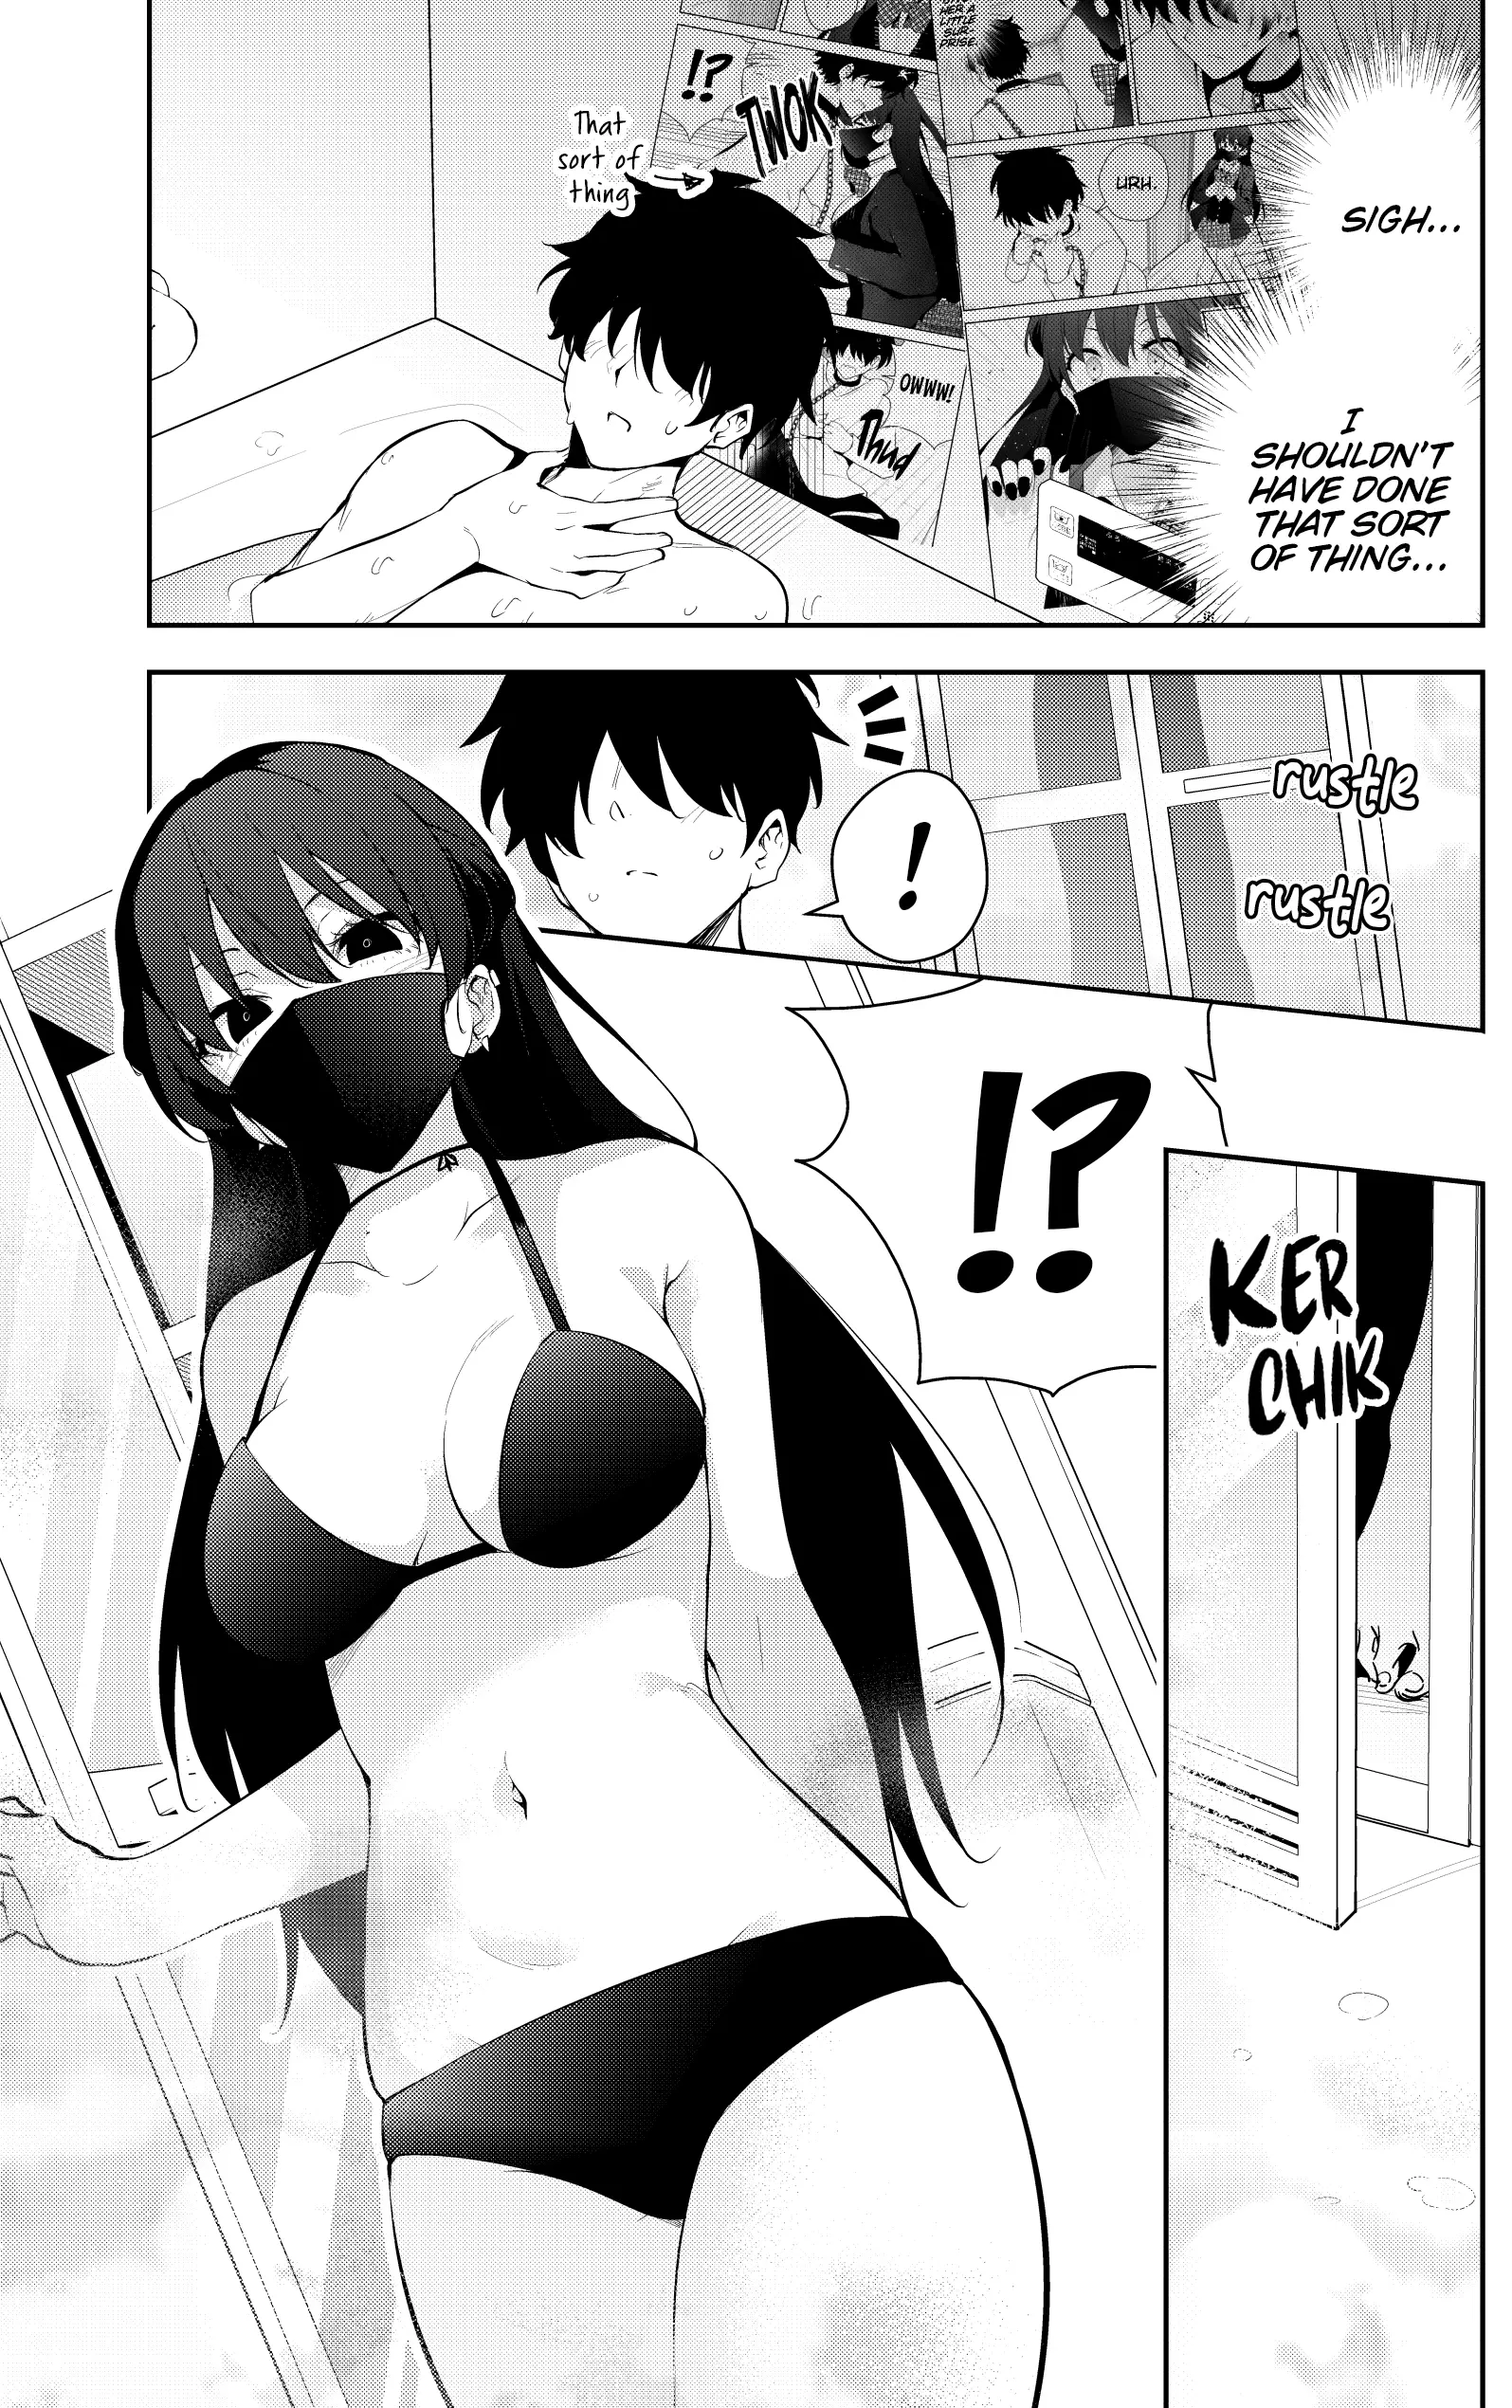 The Story Of A Manga Artist Confined By A Strange High School Girl - 17 page 2-b26a8439